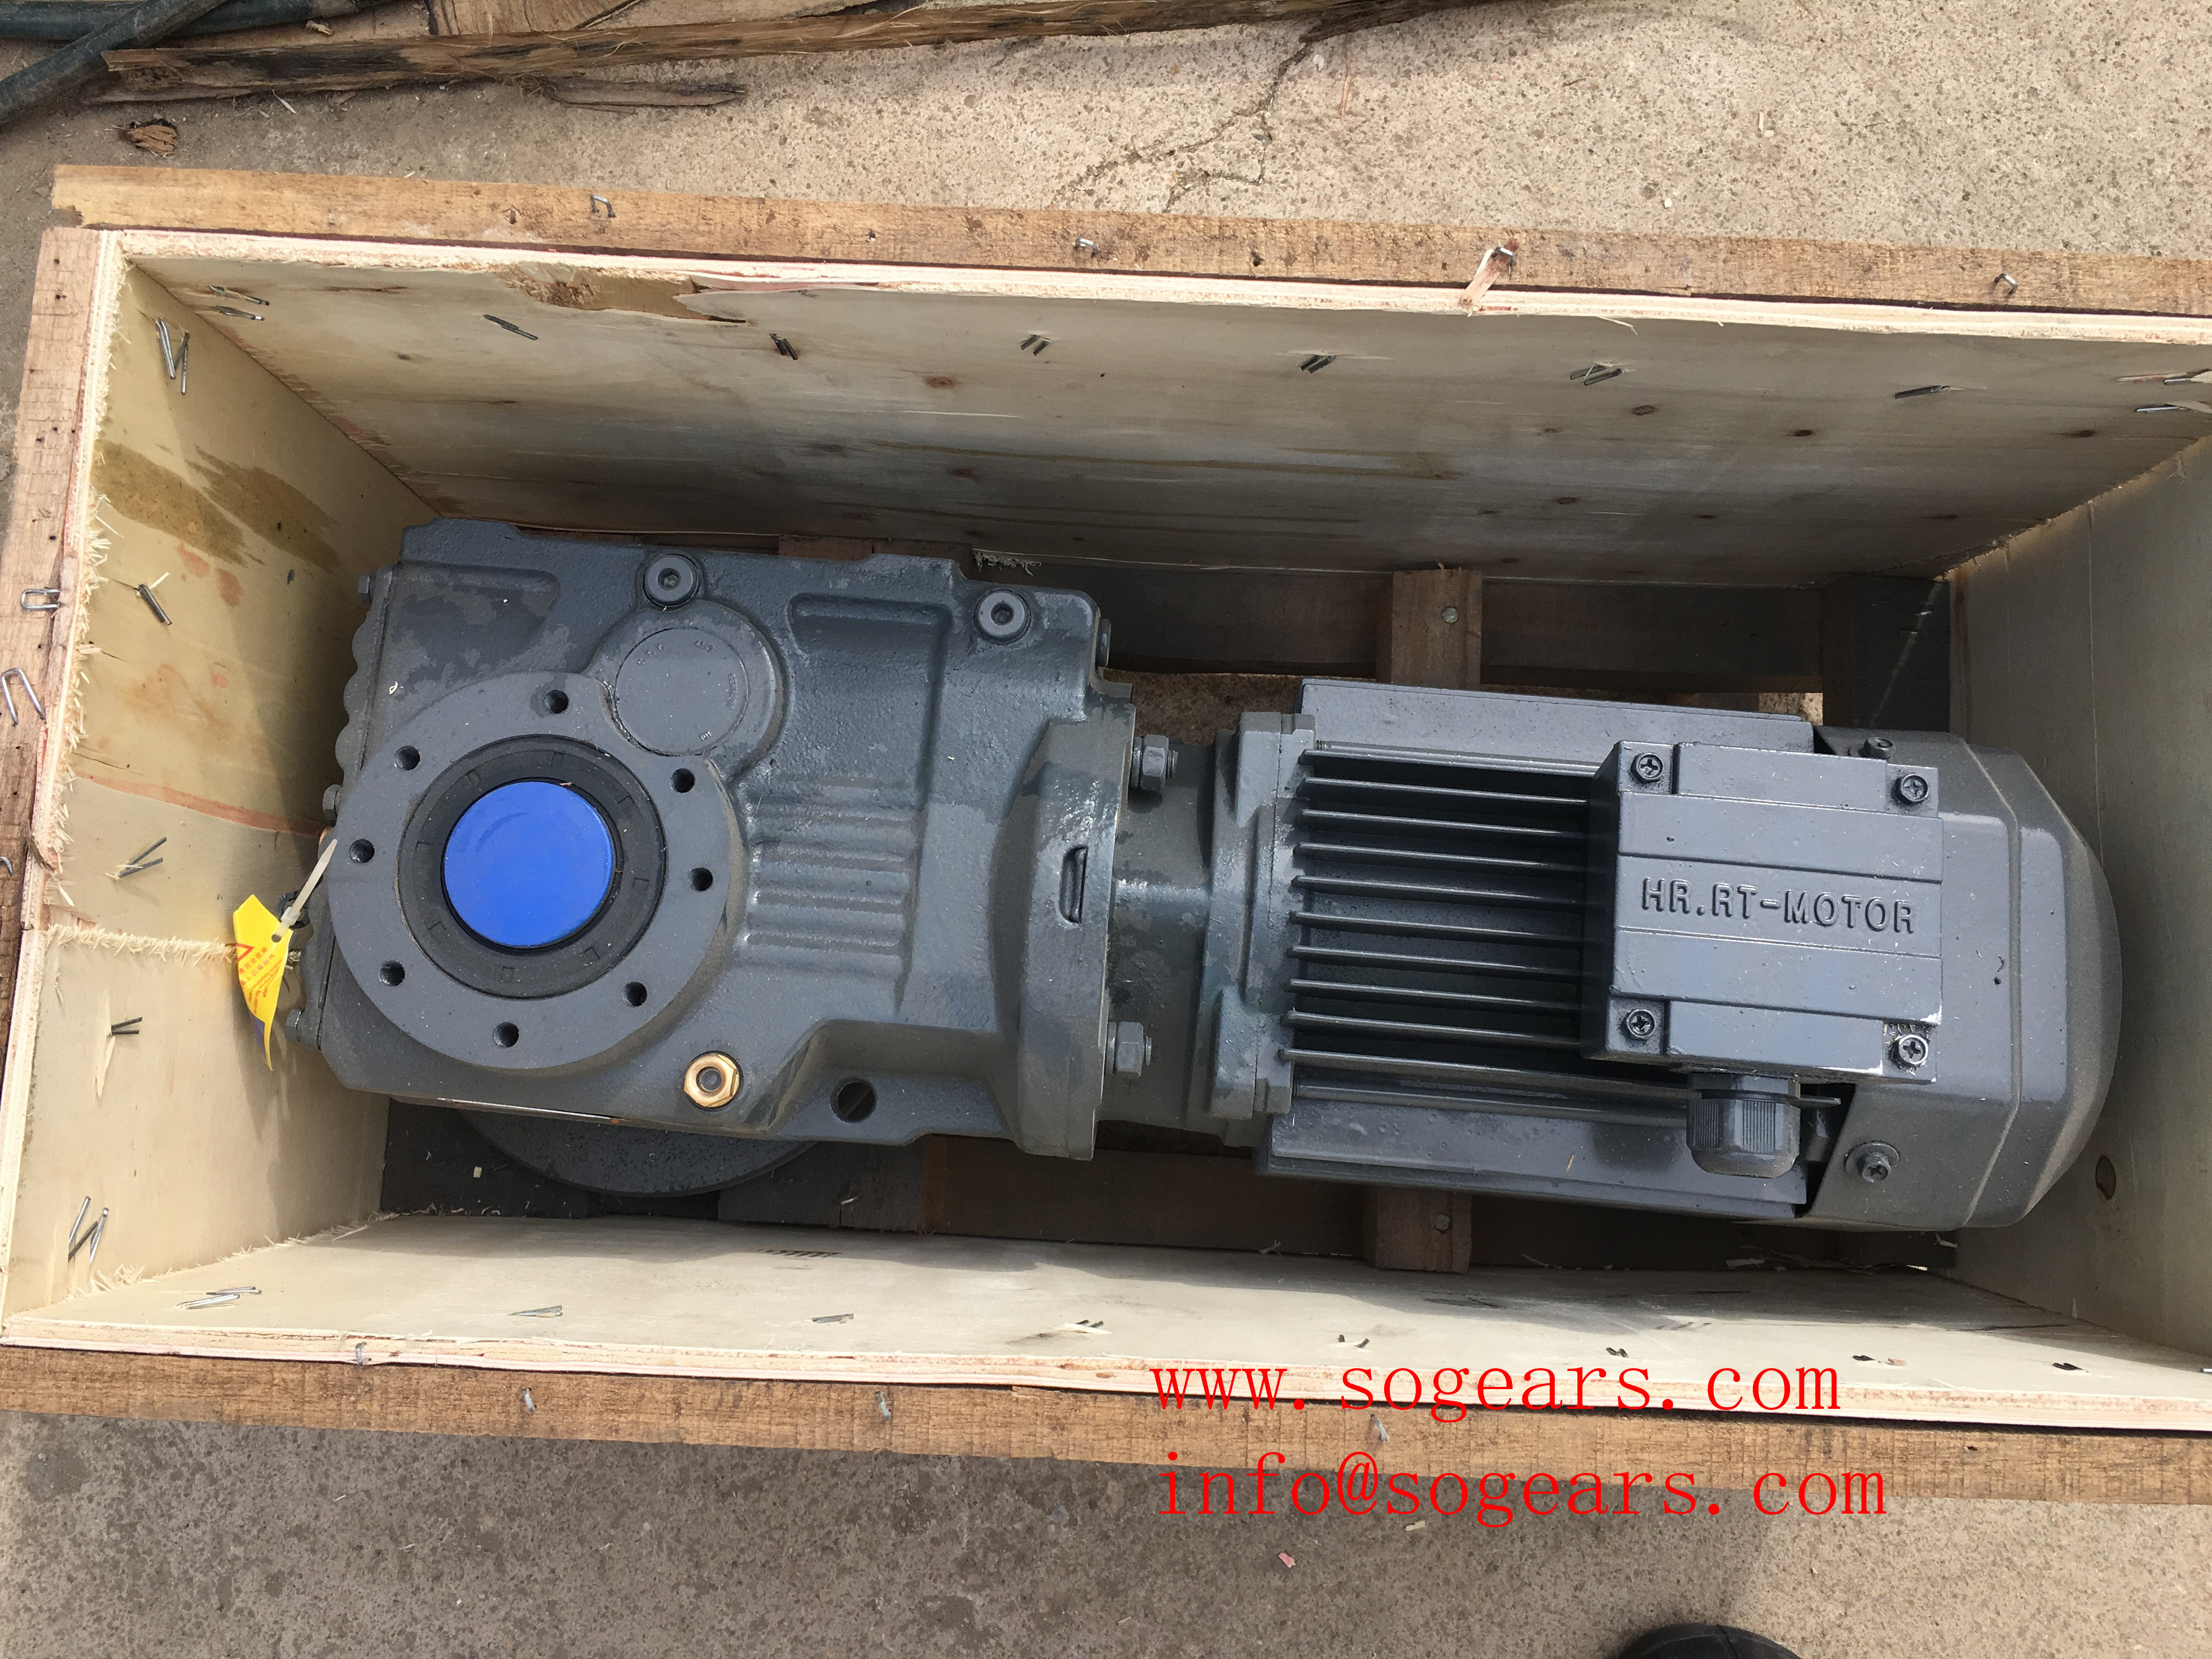 15kw induction motor price south africa